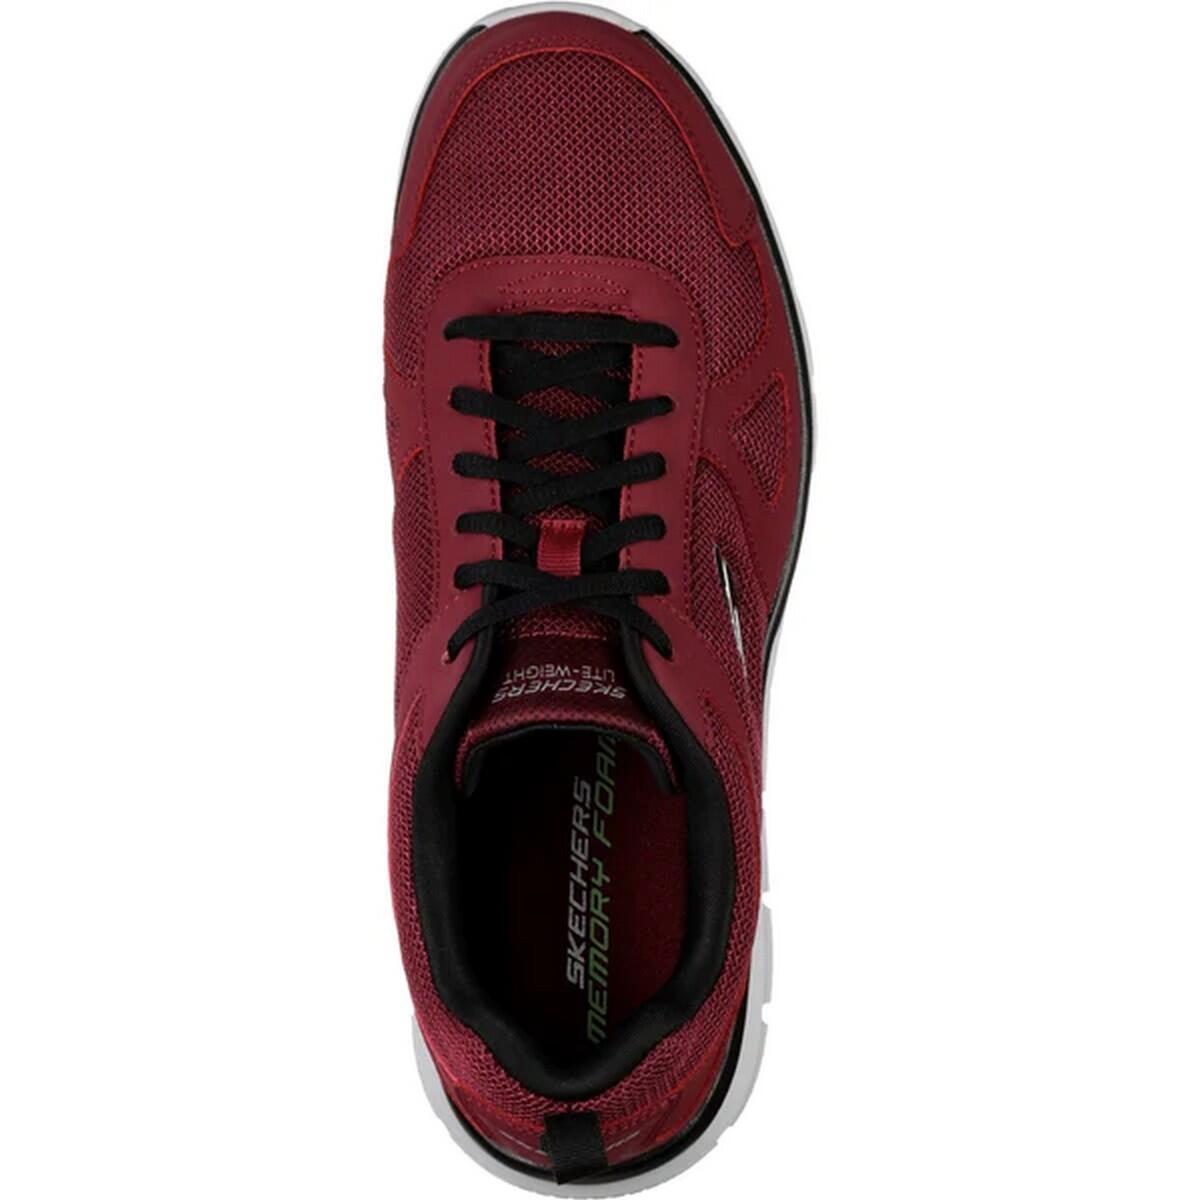 Mens Track Scloric Leather Trainers (Burgundy/Black) 4/5